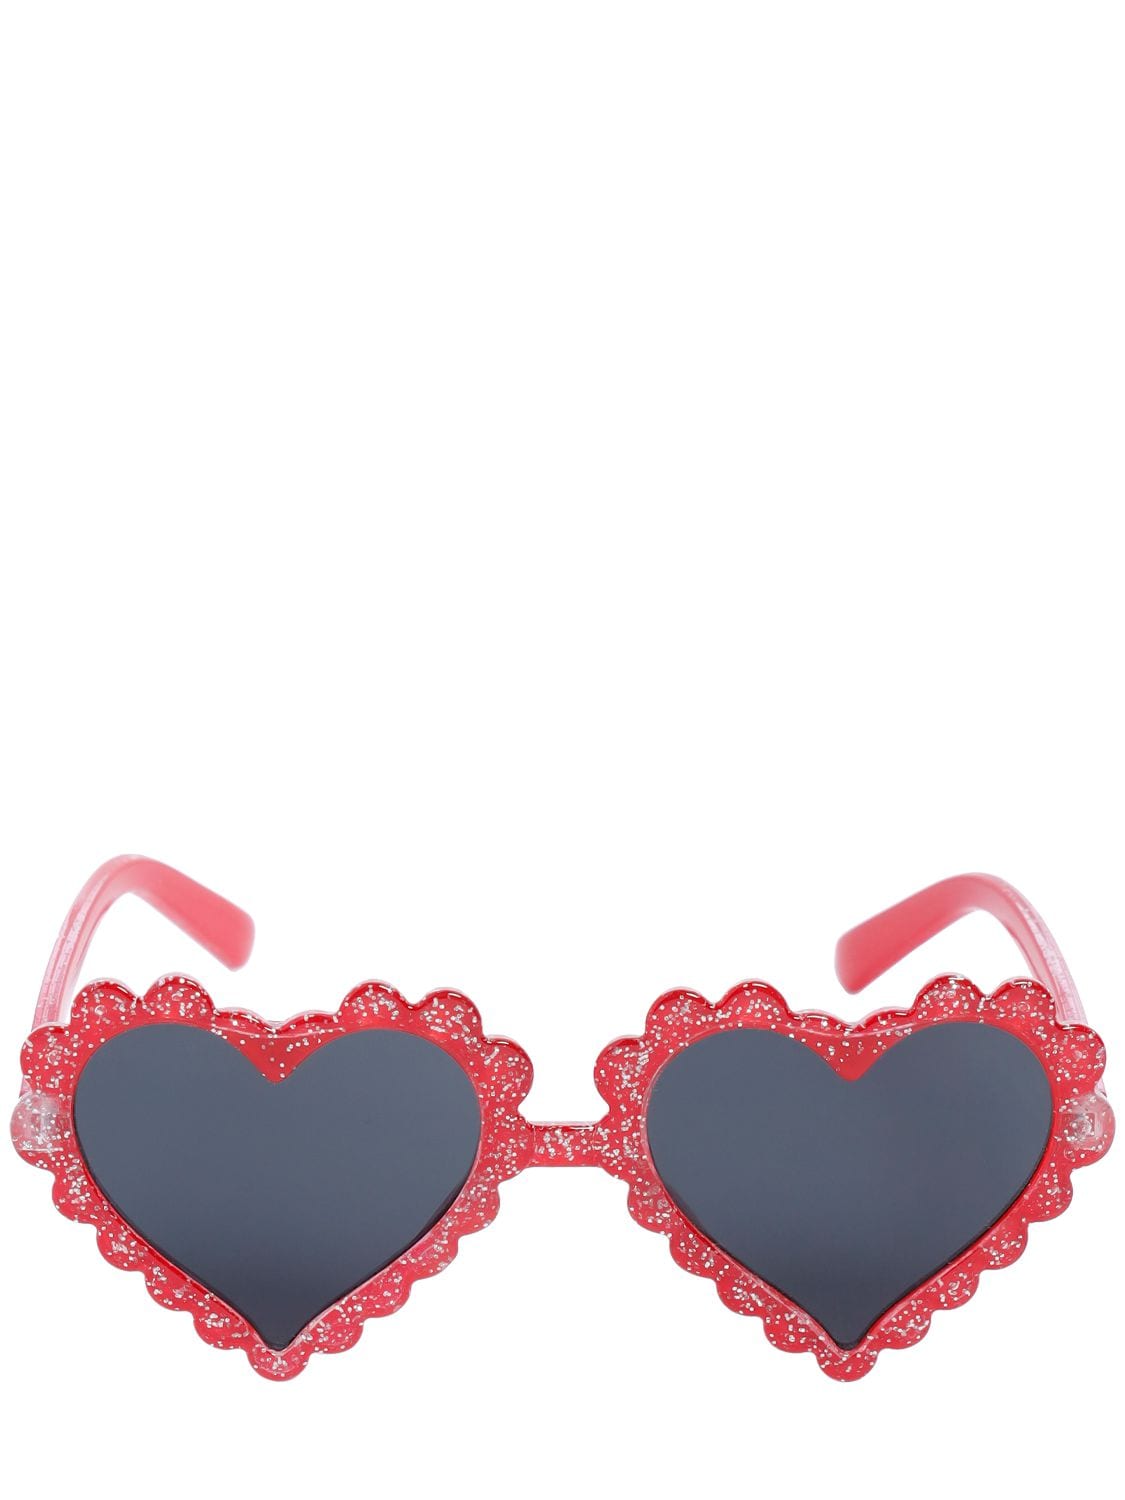 Image of Heart-shaped Polycarbonate Sunglasses